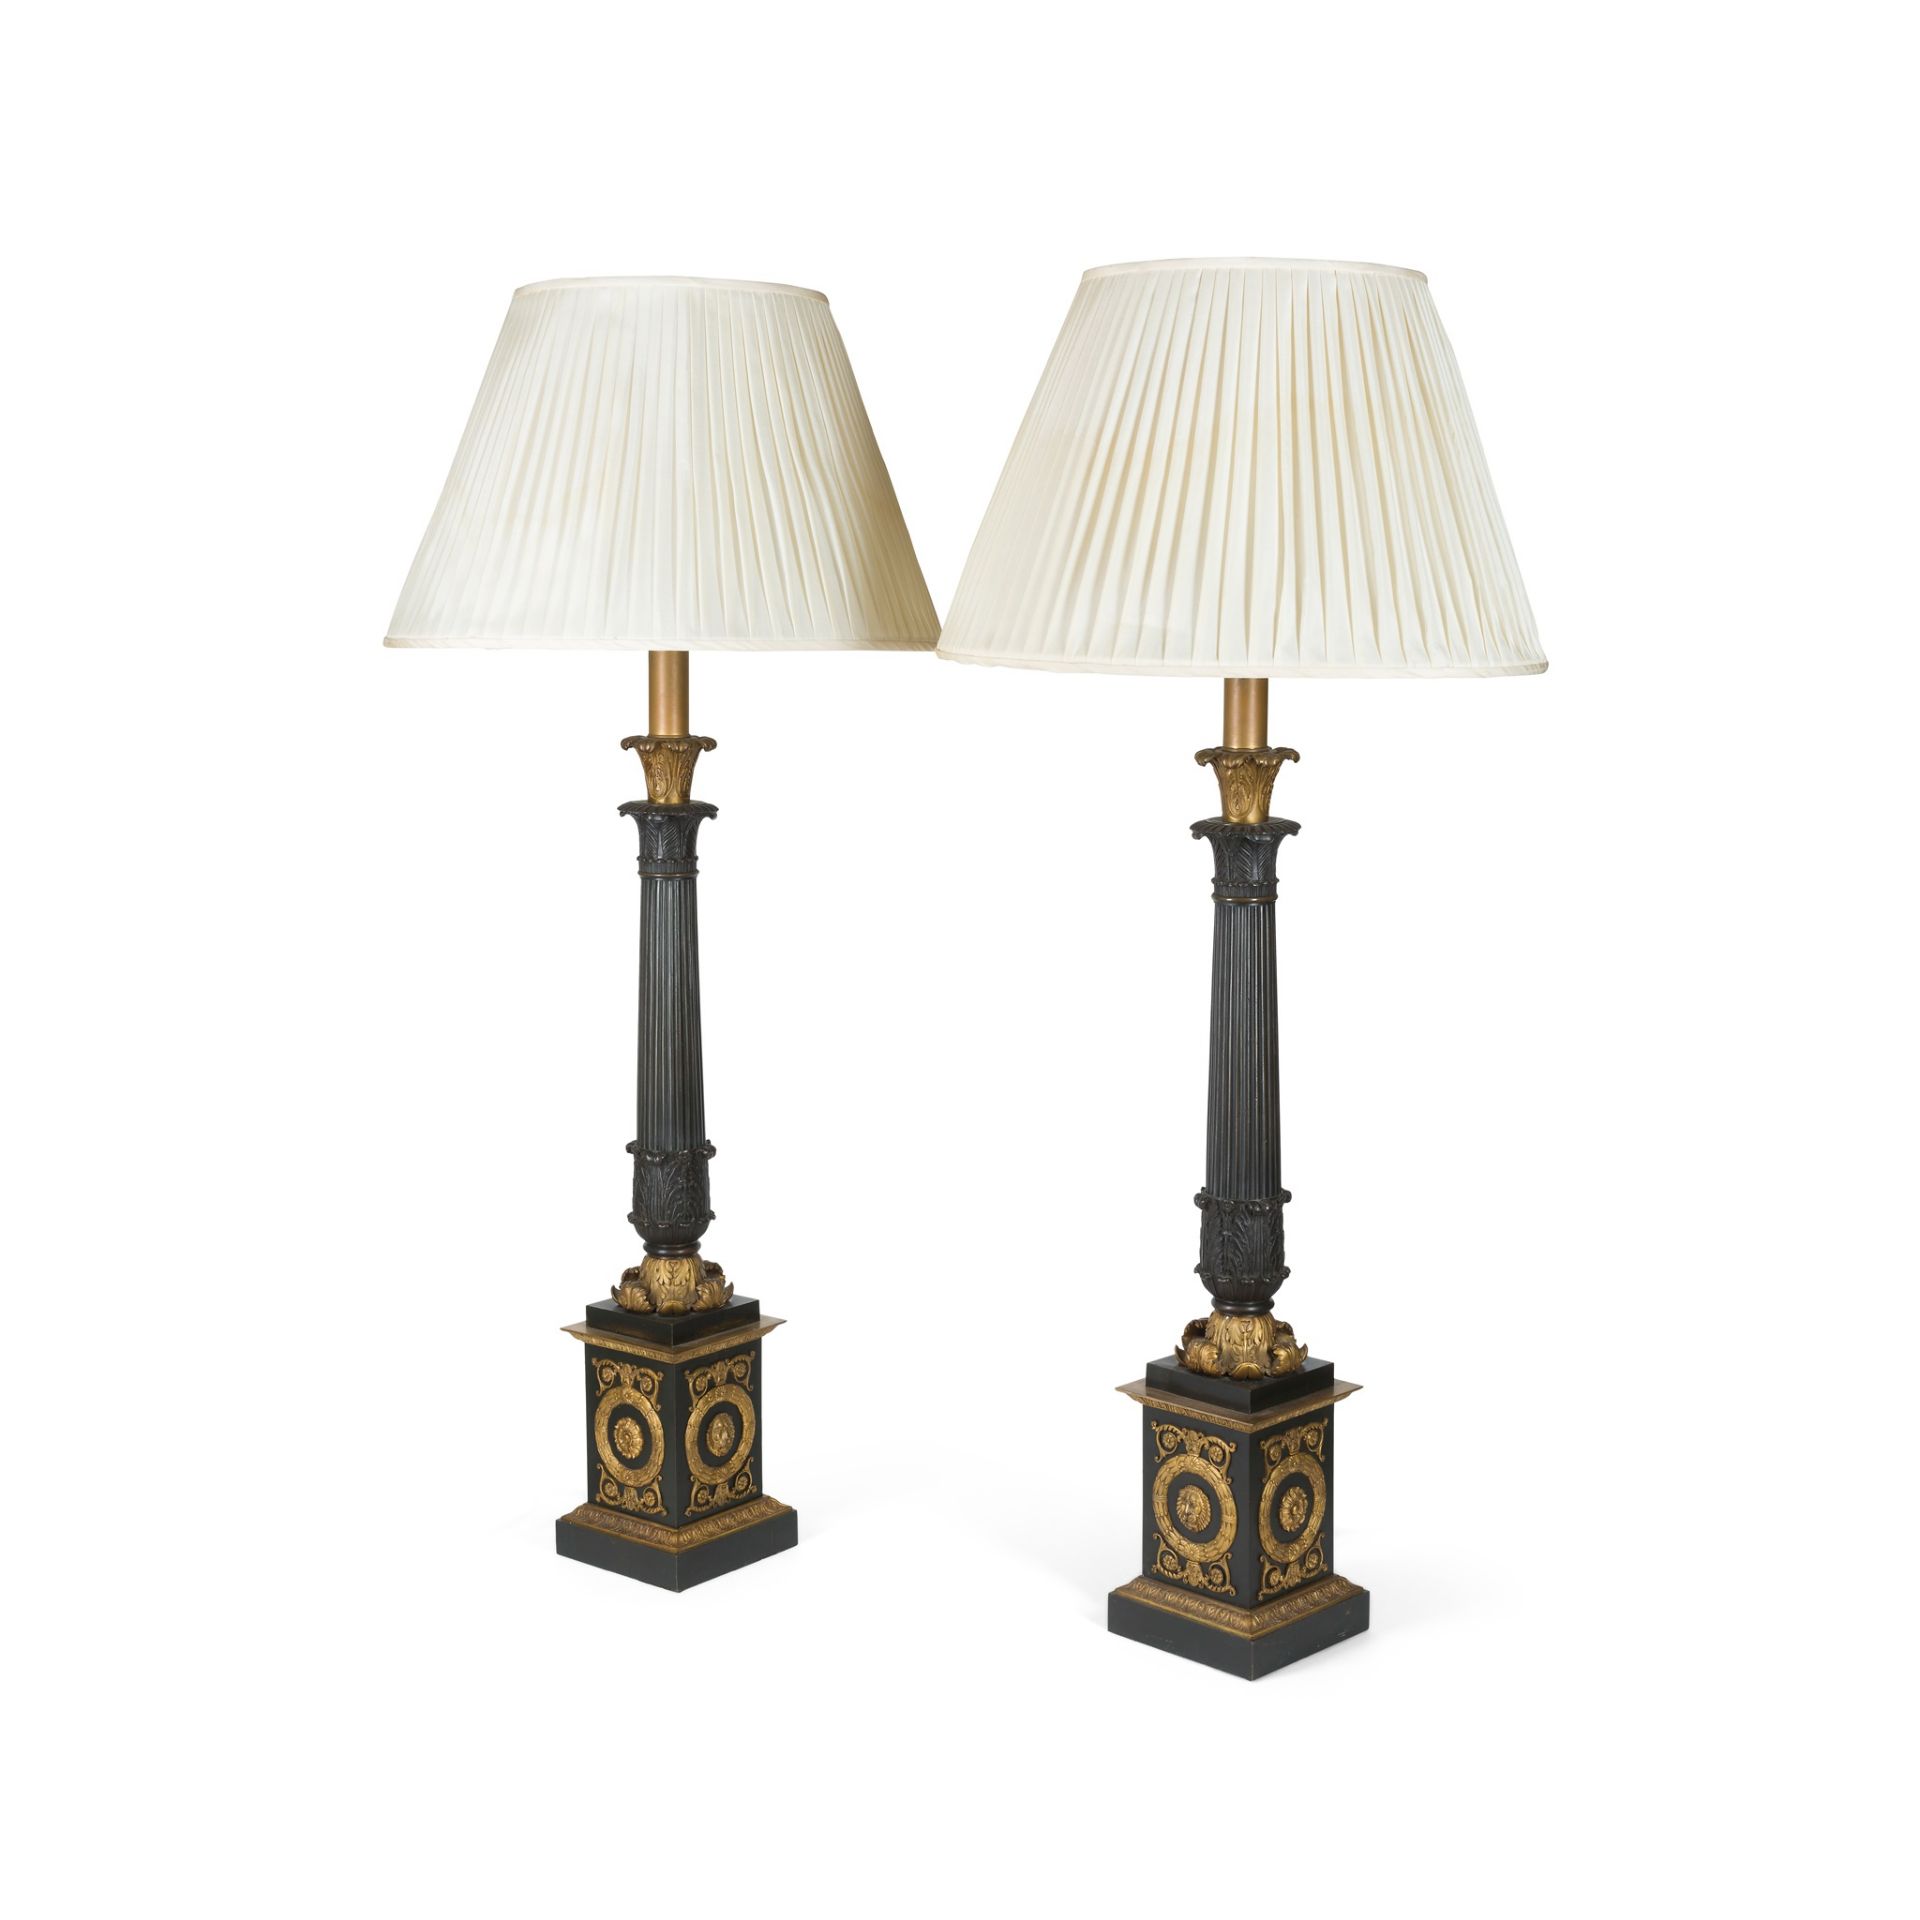 PAIR OF LARGE FRENCH EMPIRE PATINATED AND GILT BRONZE TABLE LAMPS EARLY 19TH CENTURY